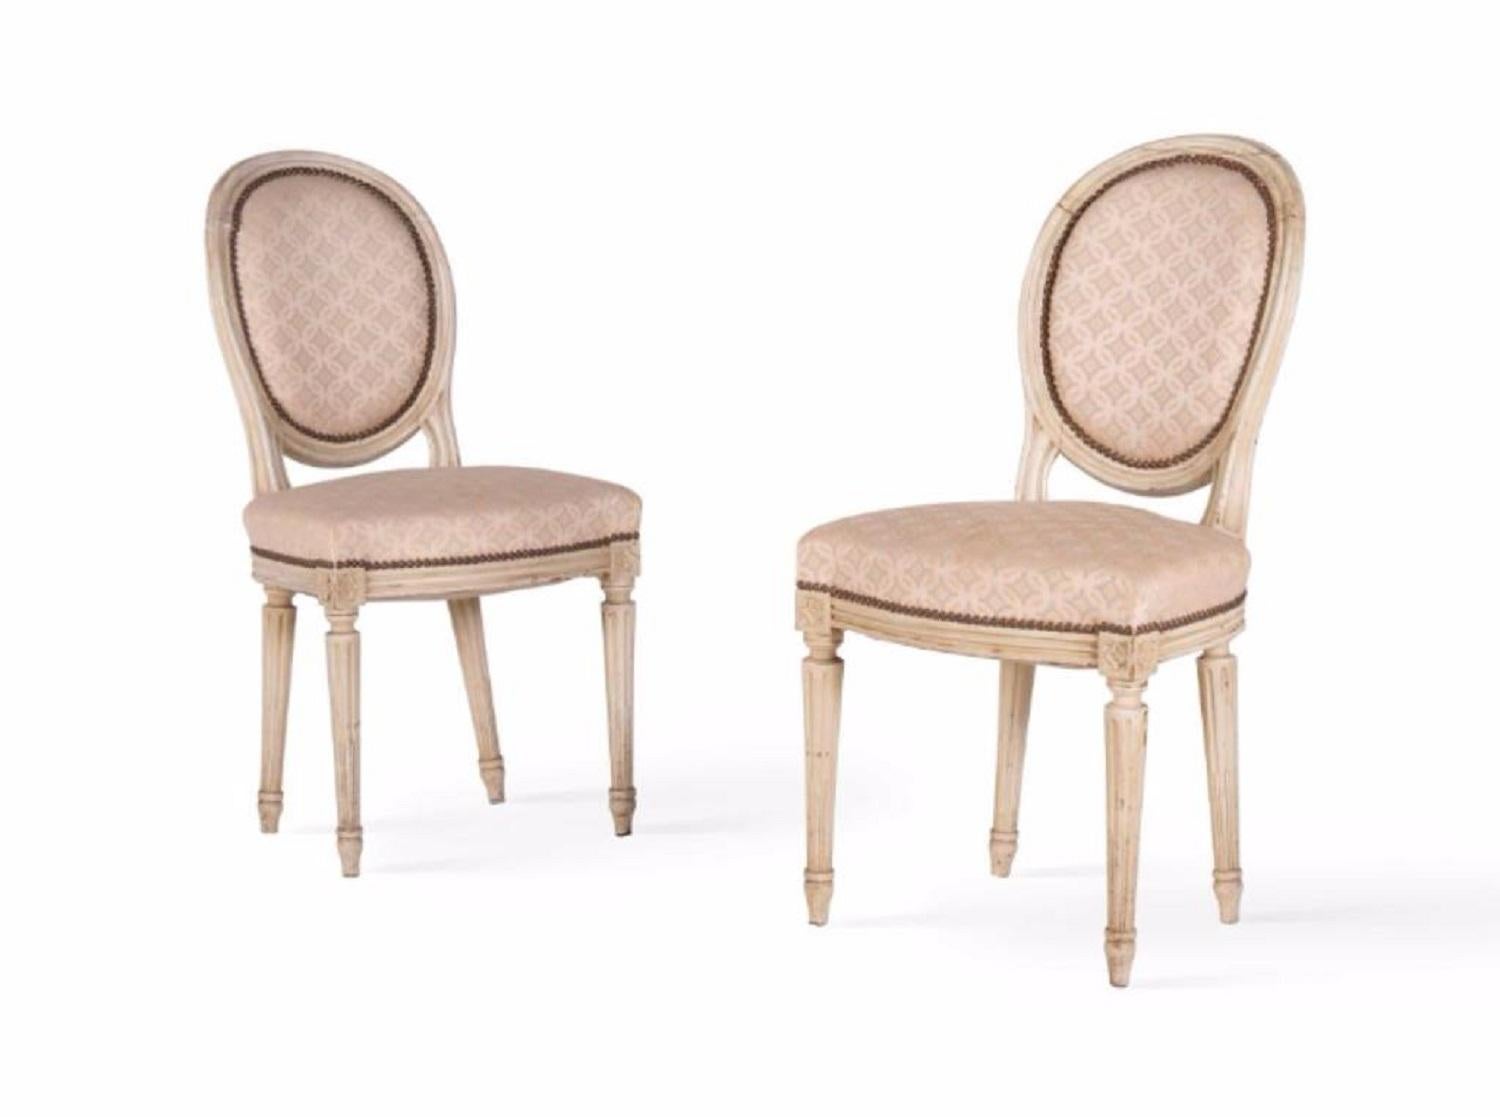 Two Elegant Antique Chairs from France in Louis XVI Style, circa 1860 In Good Condition For Sale In Sofia, BG